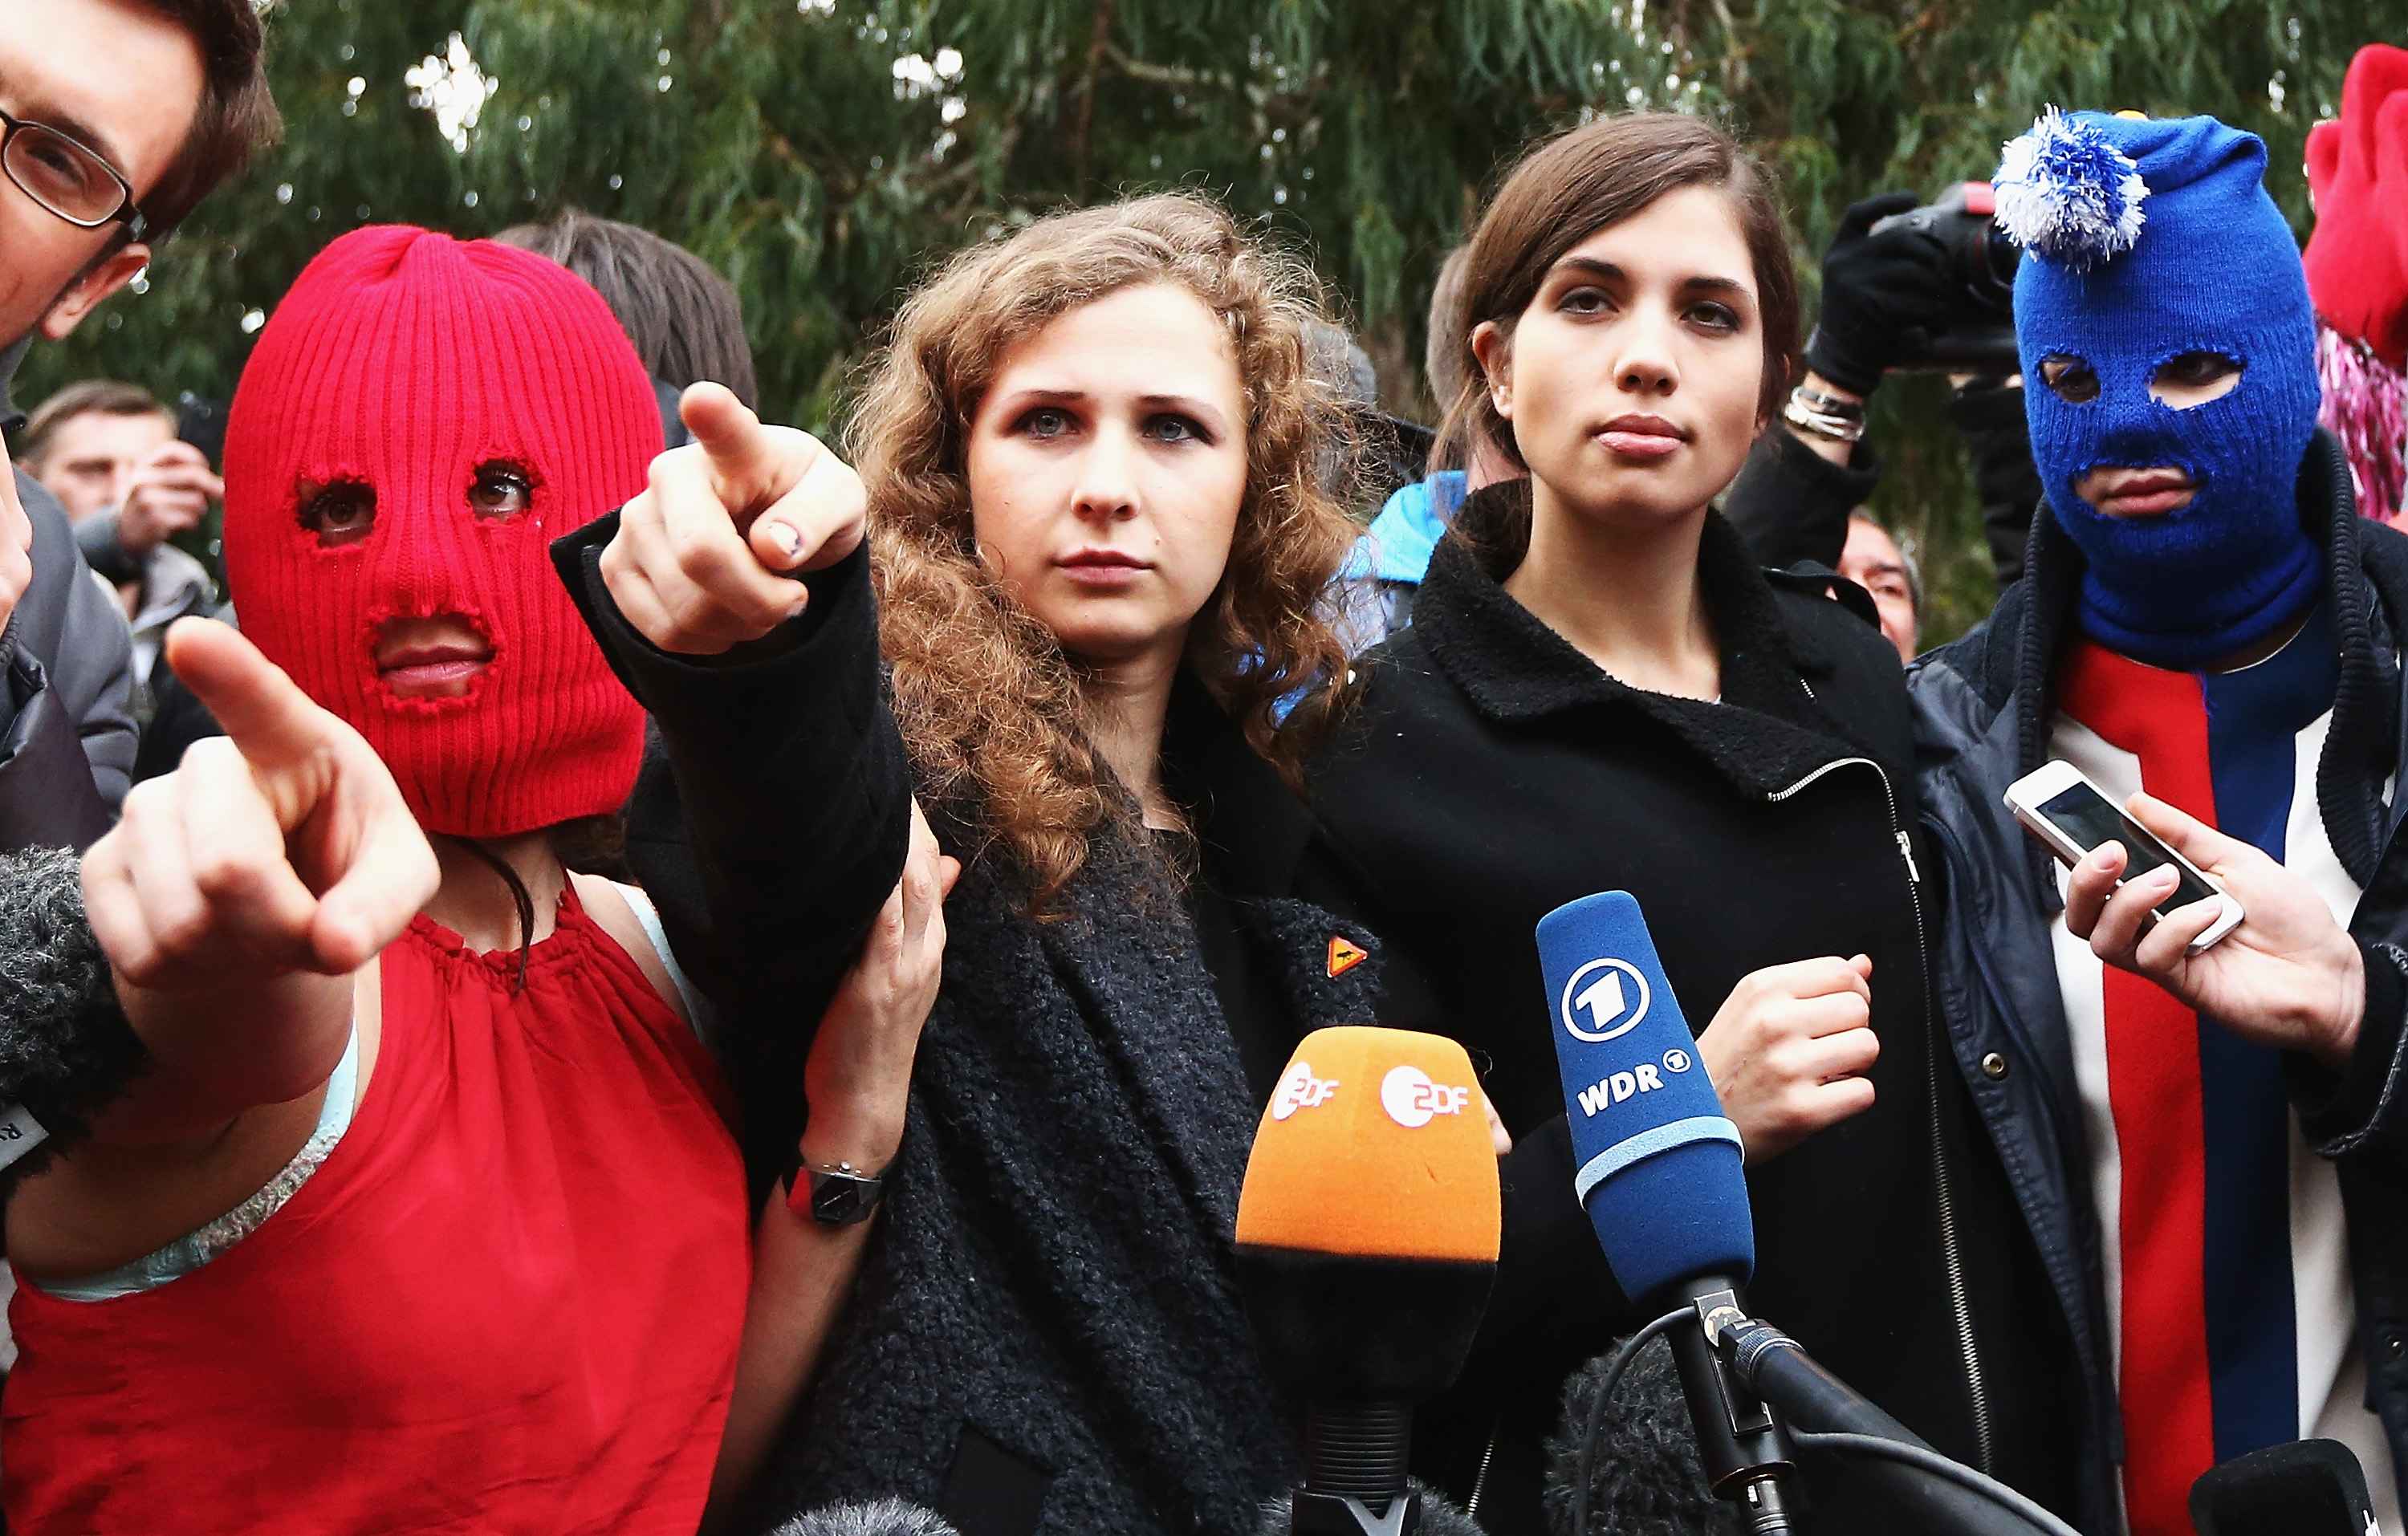 Members of the Russian protest group Pussy Riot.